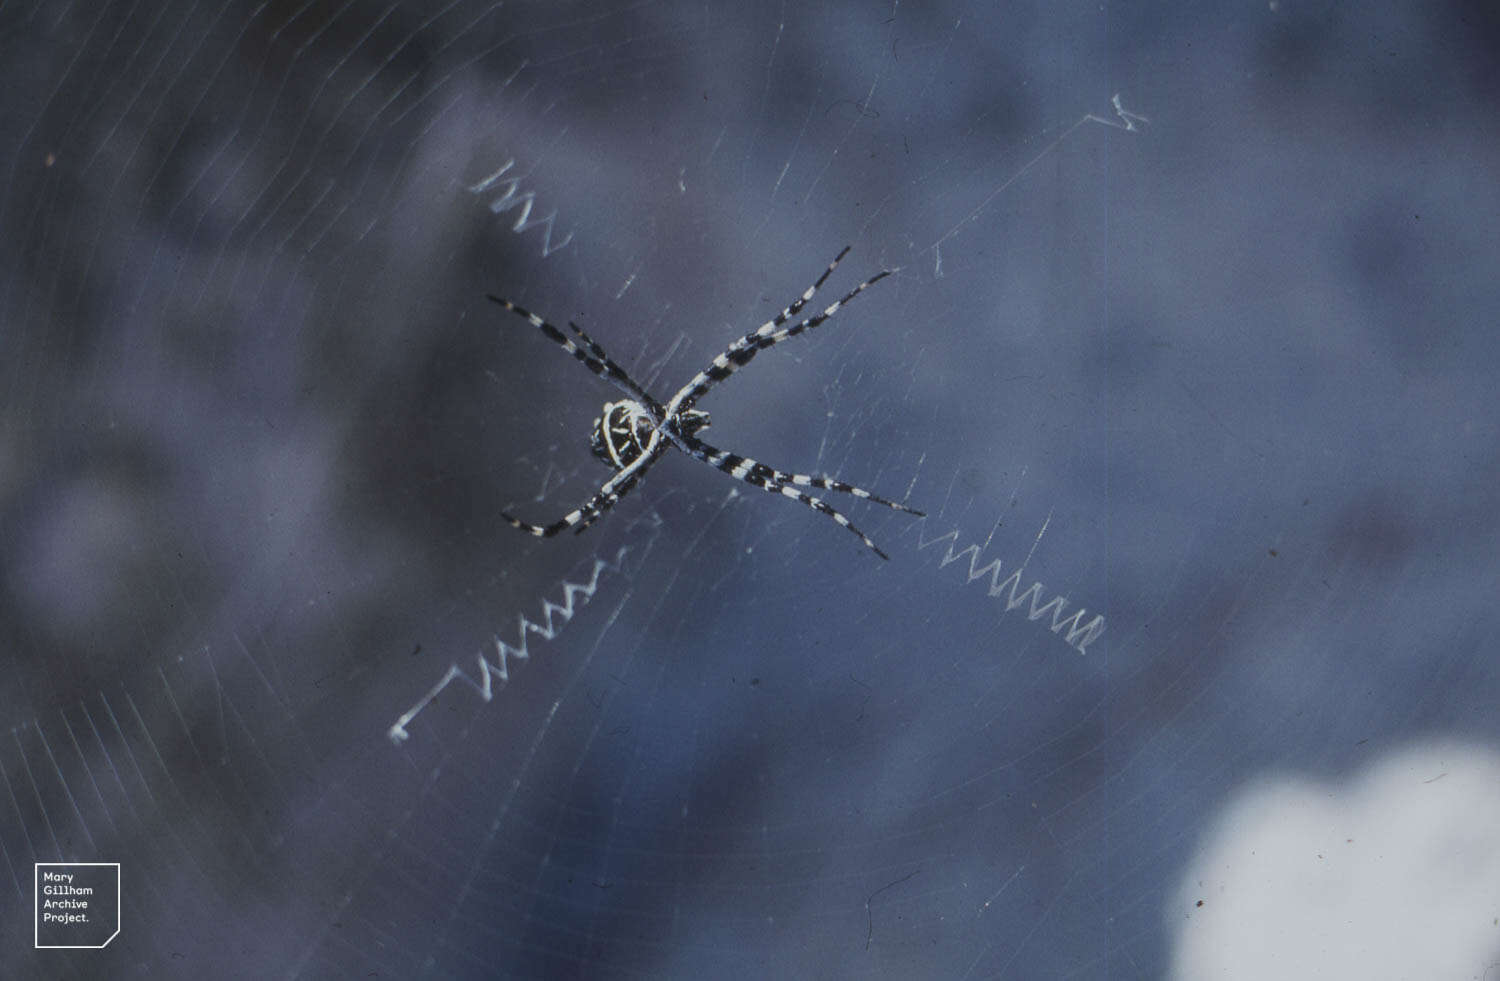 Image of St Andrews cross spider